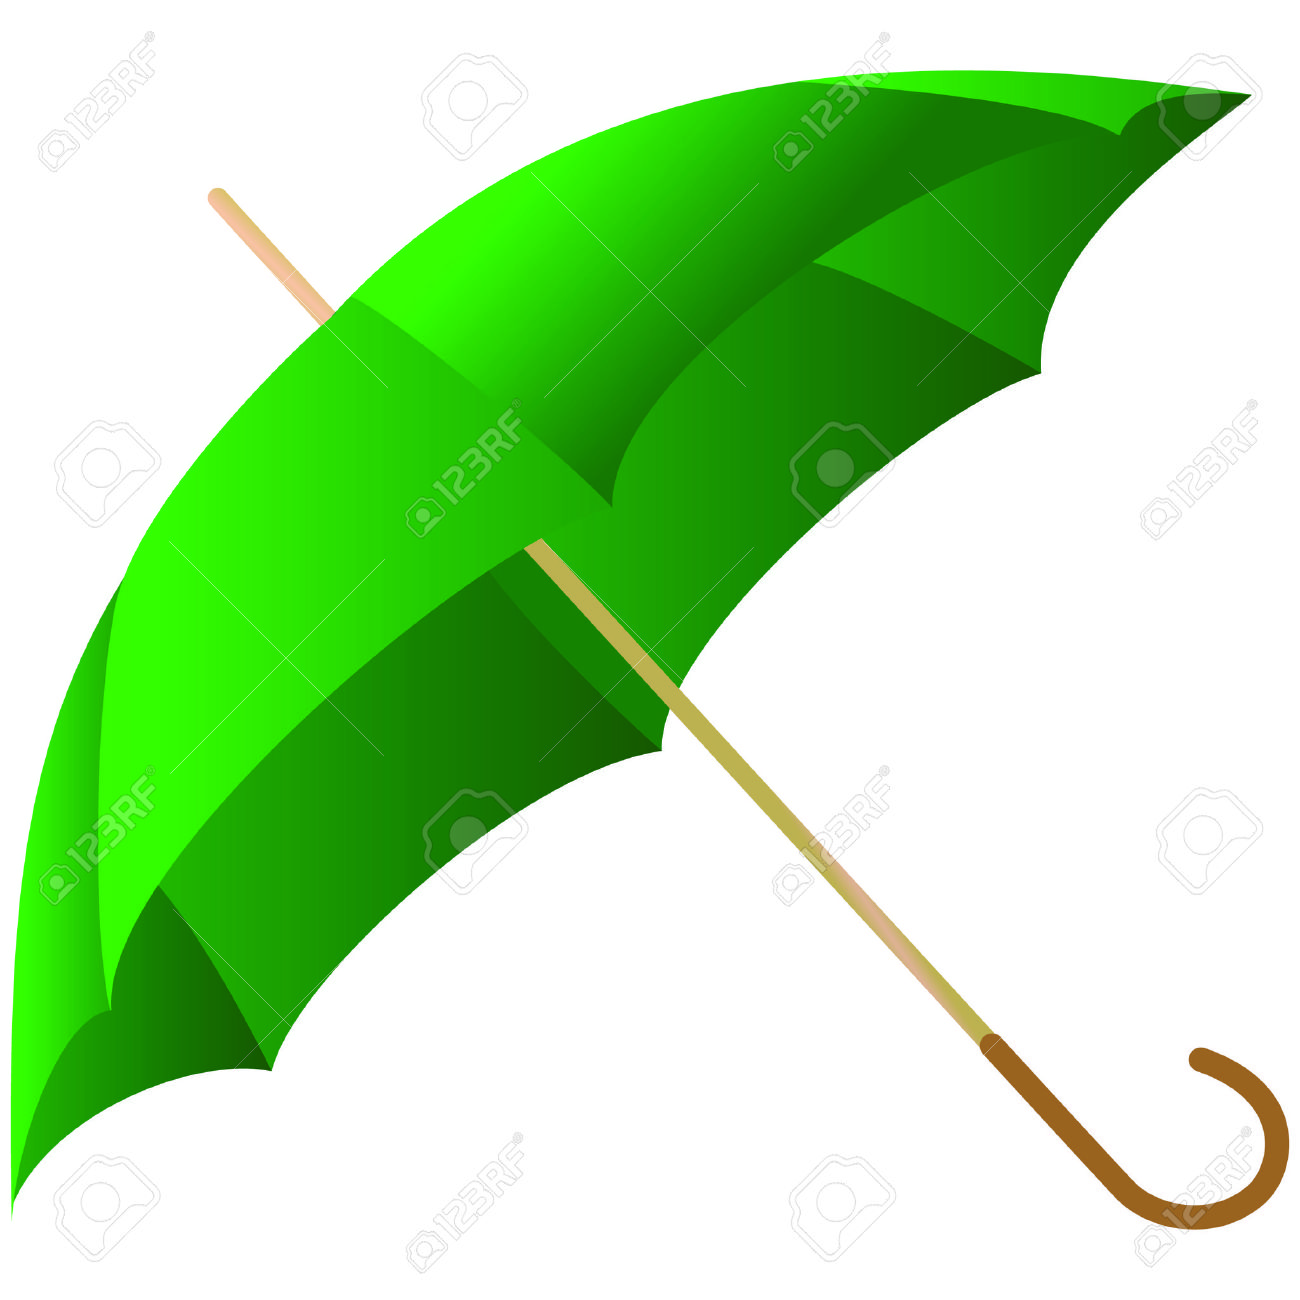 The Green Umbrella Represented On A White Background Royalty Free.